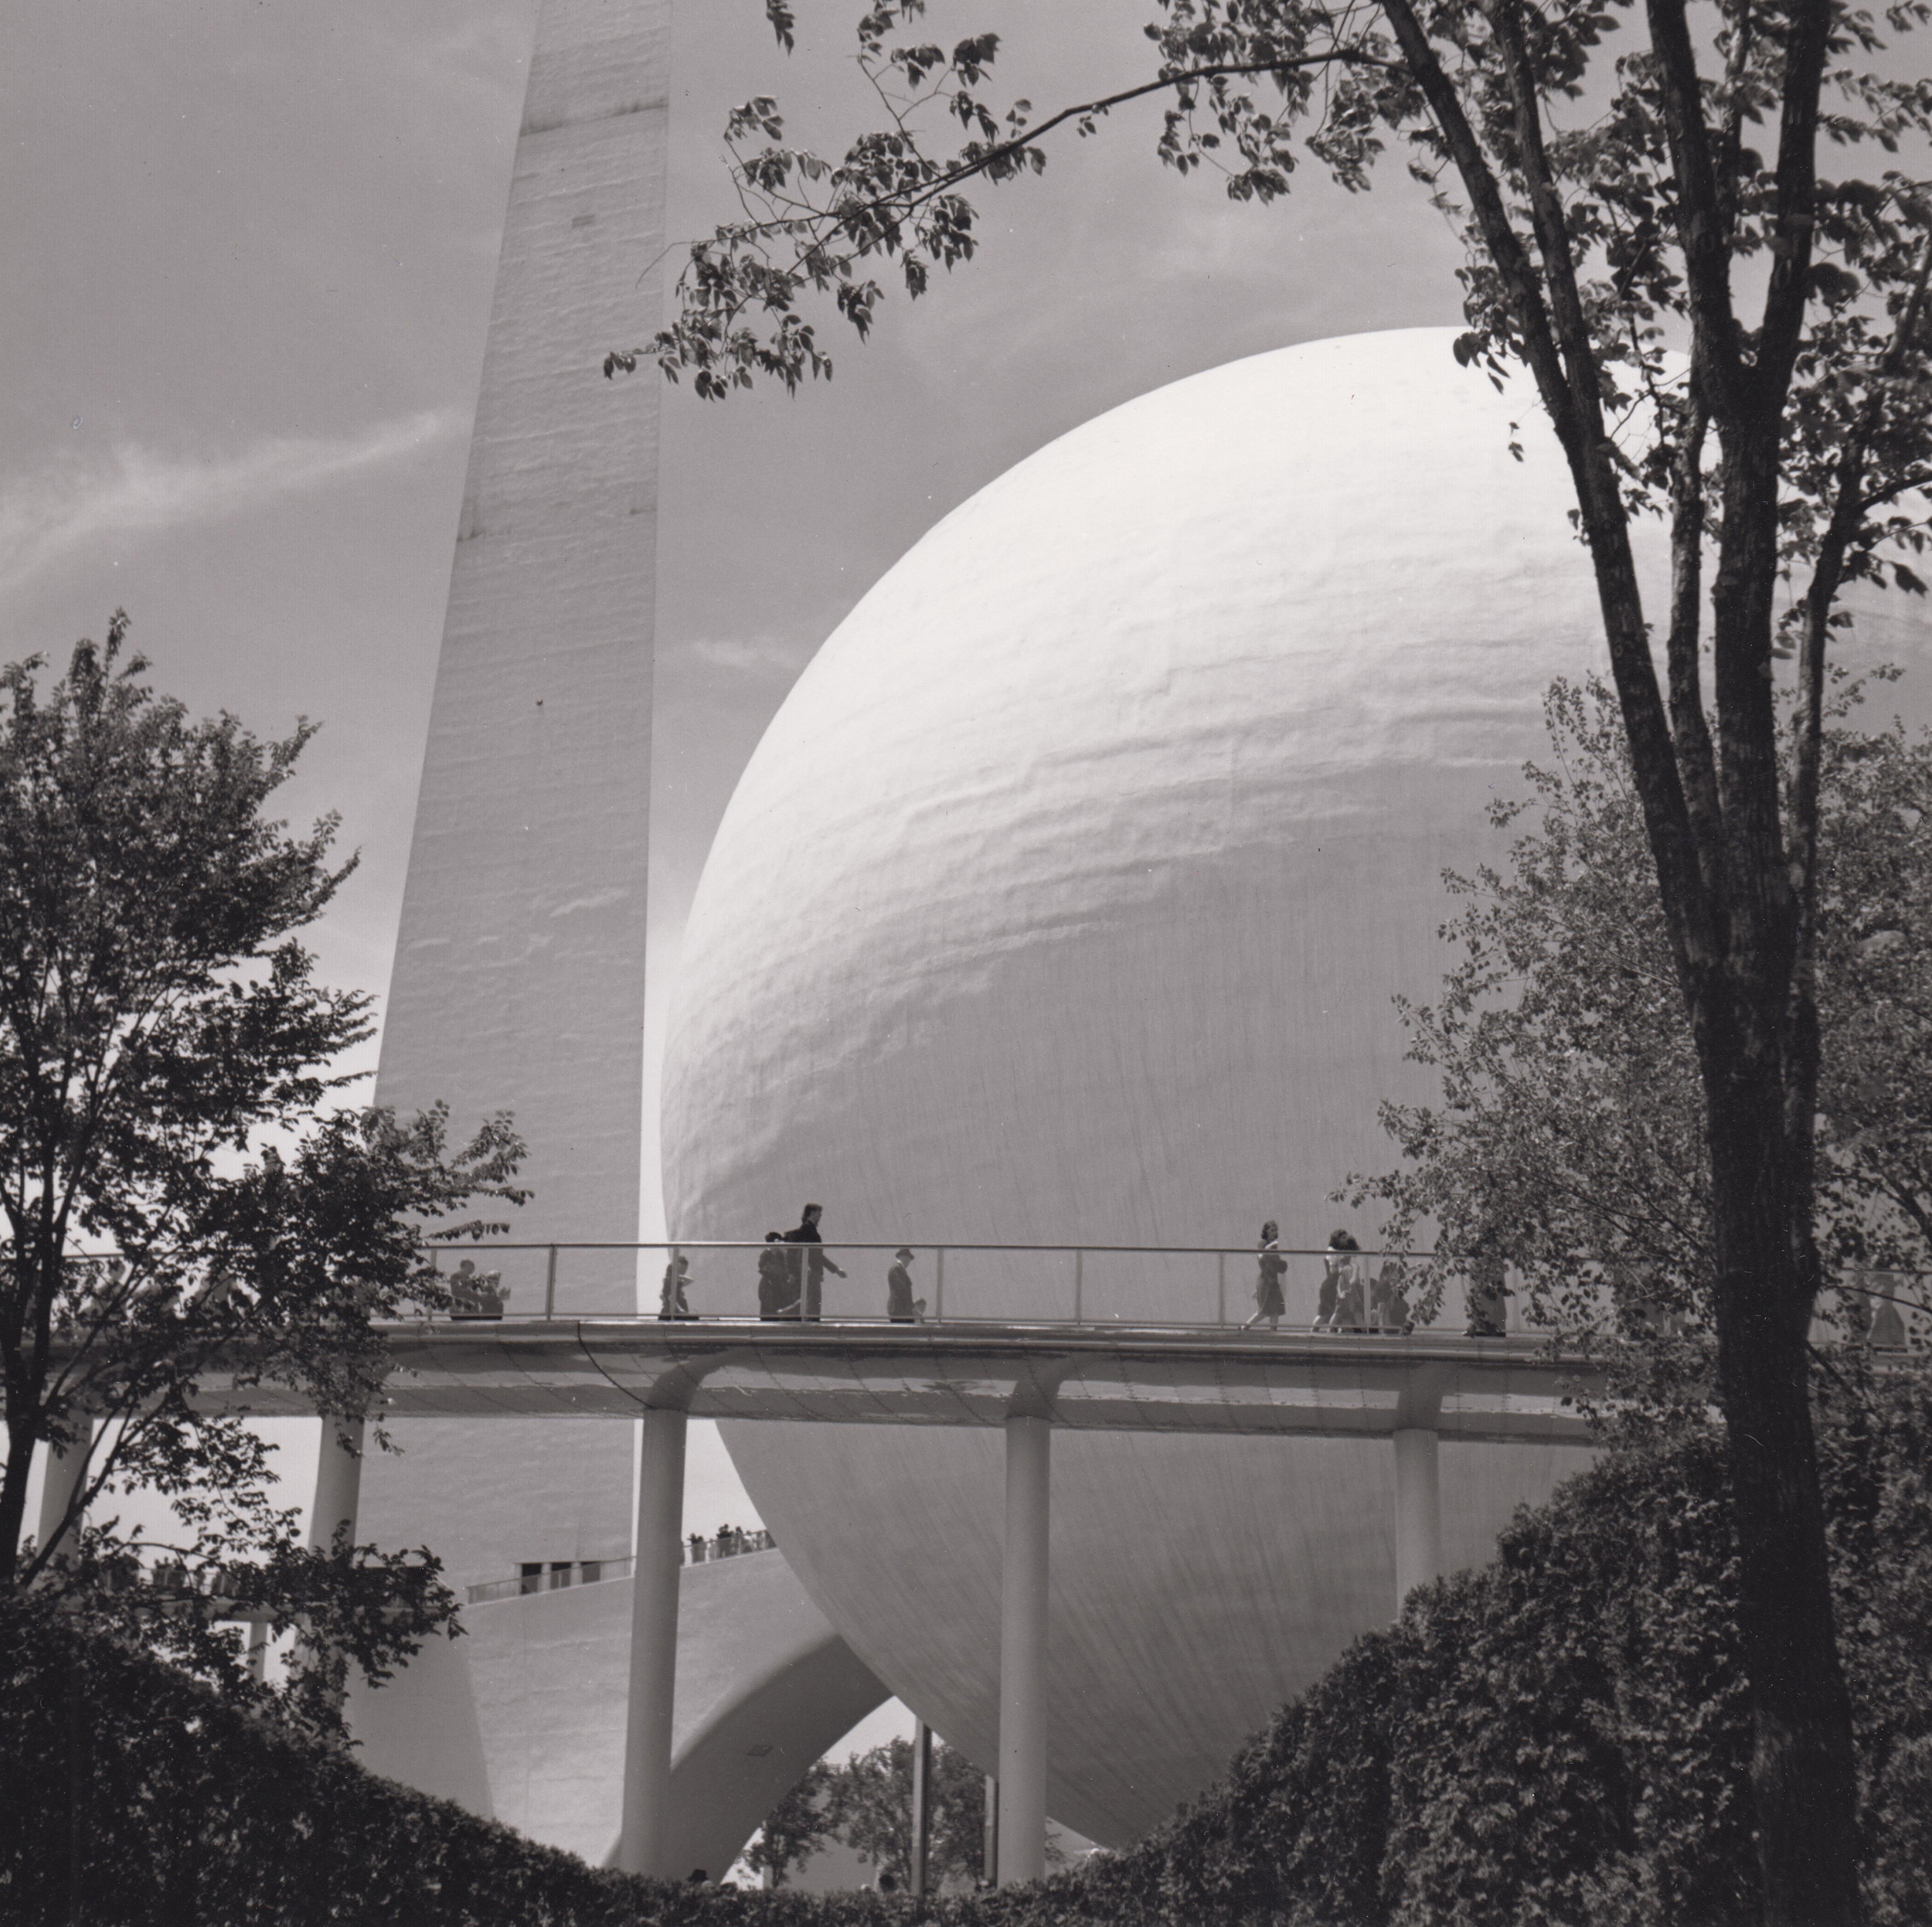 A black and white photo of two grand, modern sculptures with a triangular and spherical shape. With confident presence they occupy a sky with wispy clouds. In front of the sculptures is a raised walkway with people walking by. Framing the view is foliage and trees. 